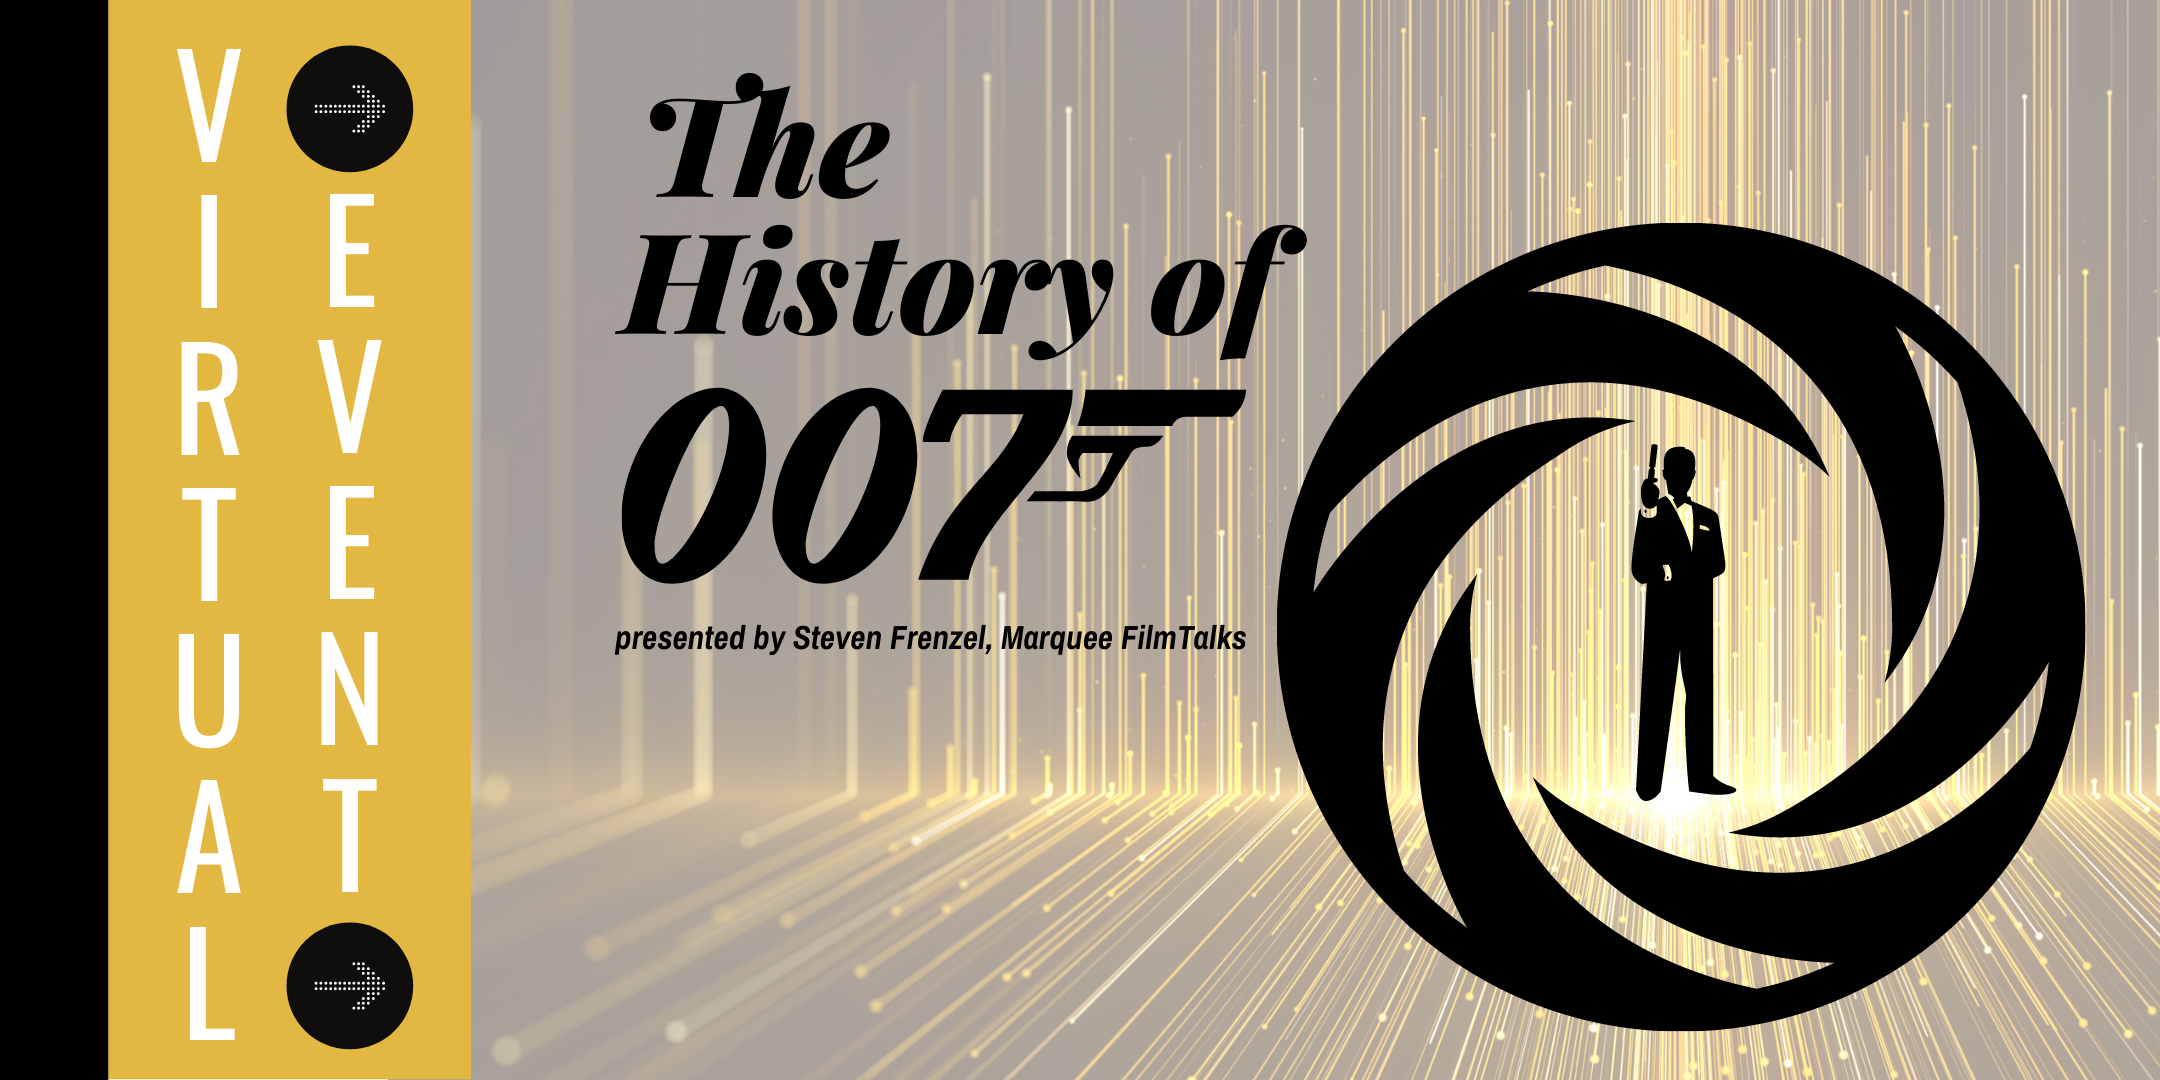 The History of 007 image